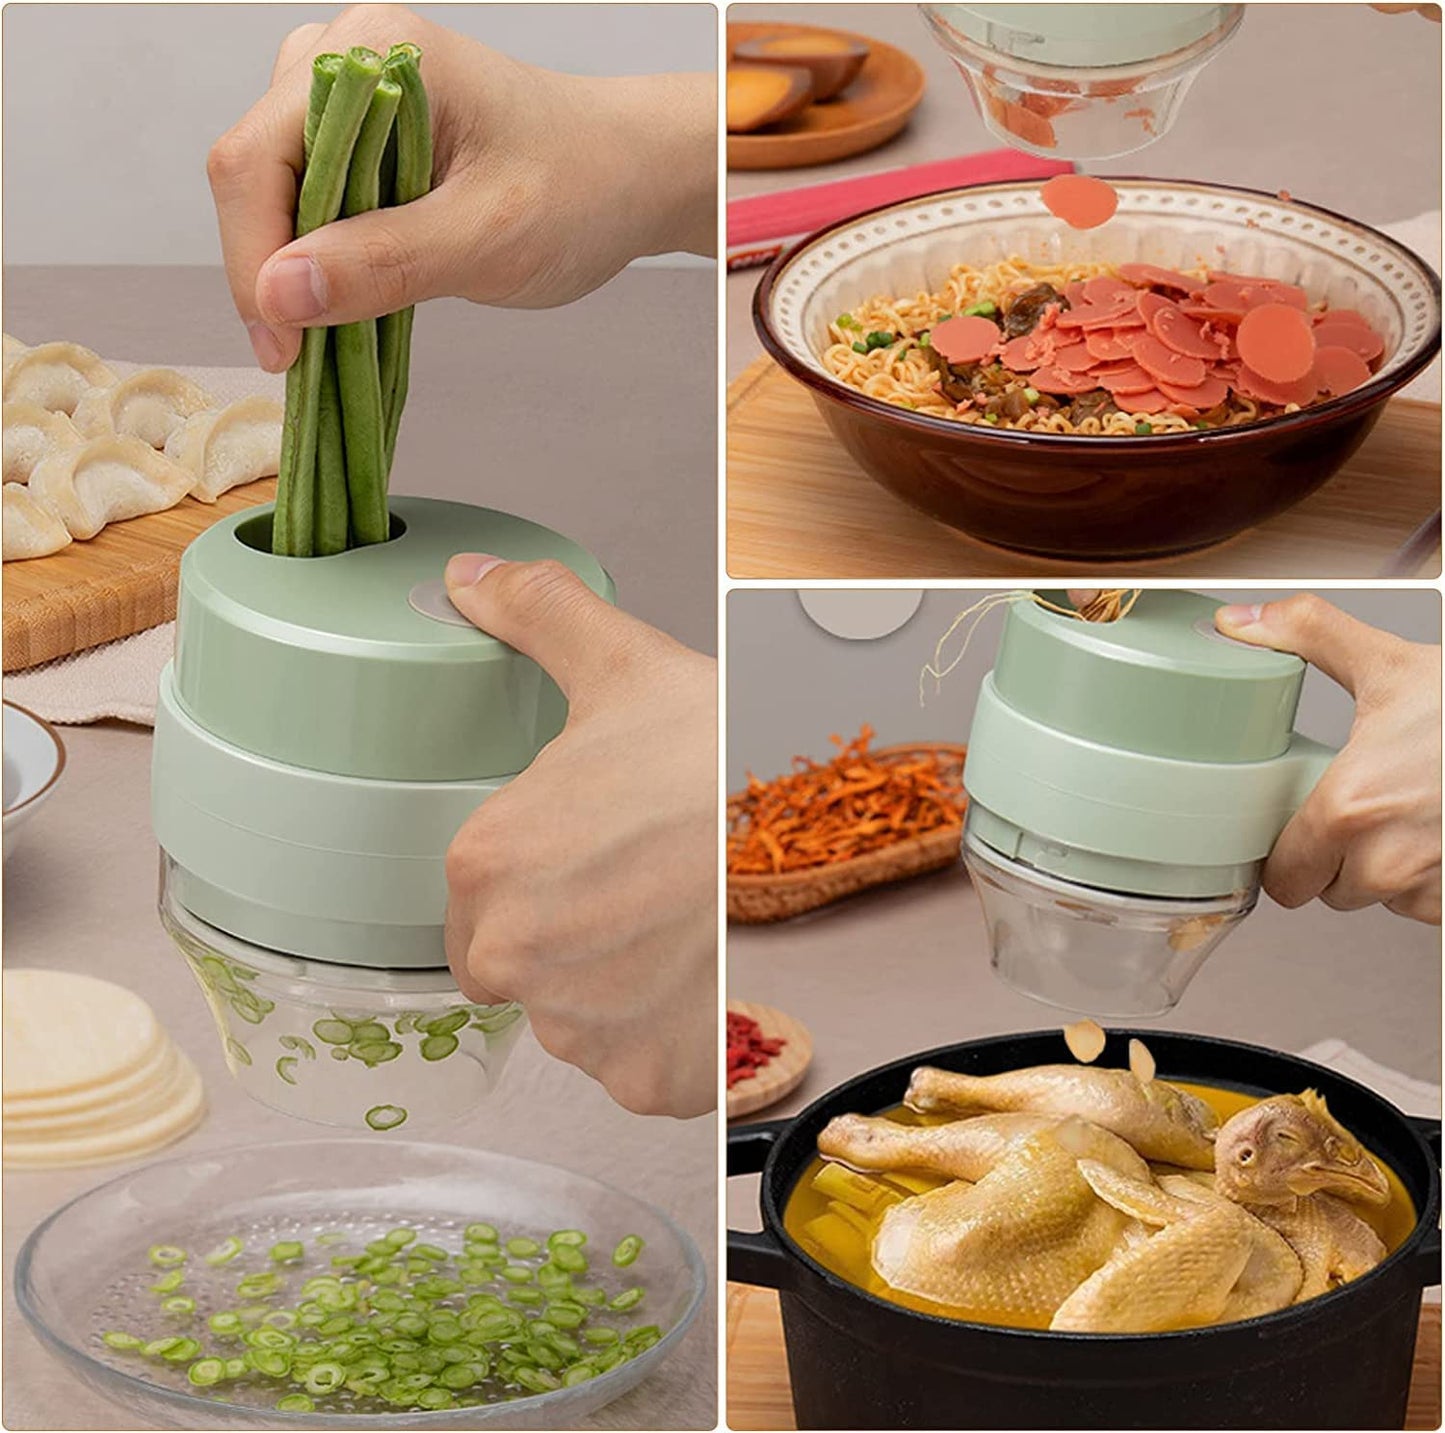 4 in 1 Portable Electric Vegetable Cutter Set CAMMILE Wireless Food Processor for Garlic Pepper Chili Onion Celery Ginger Meat with Brush